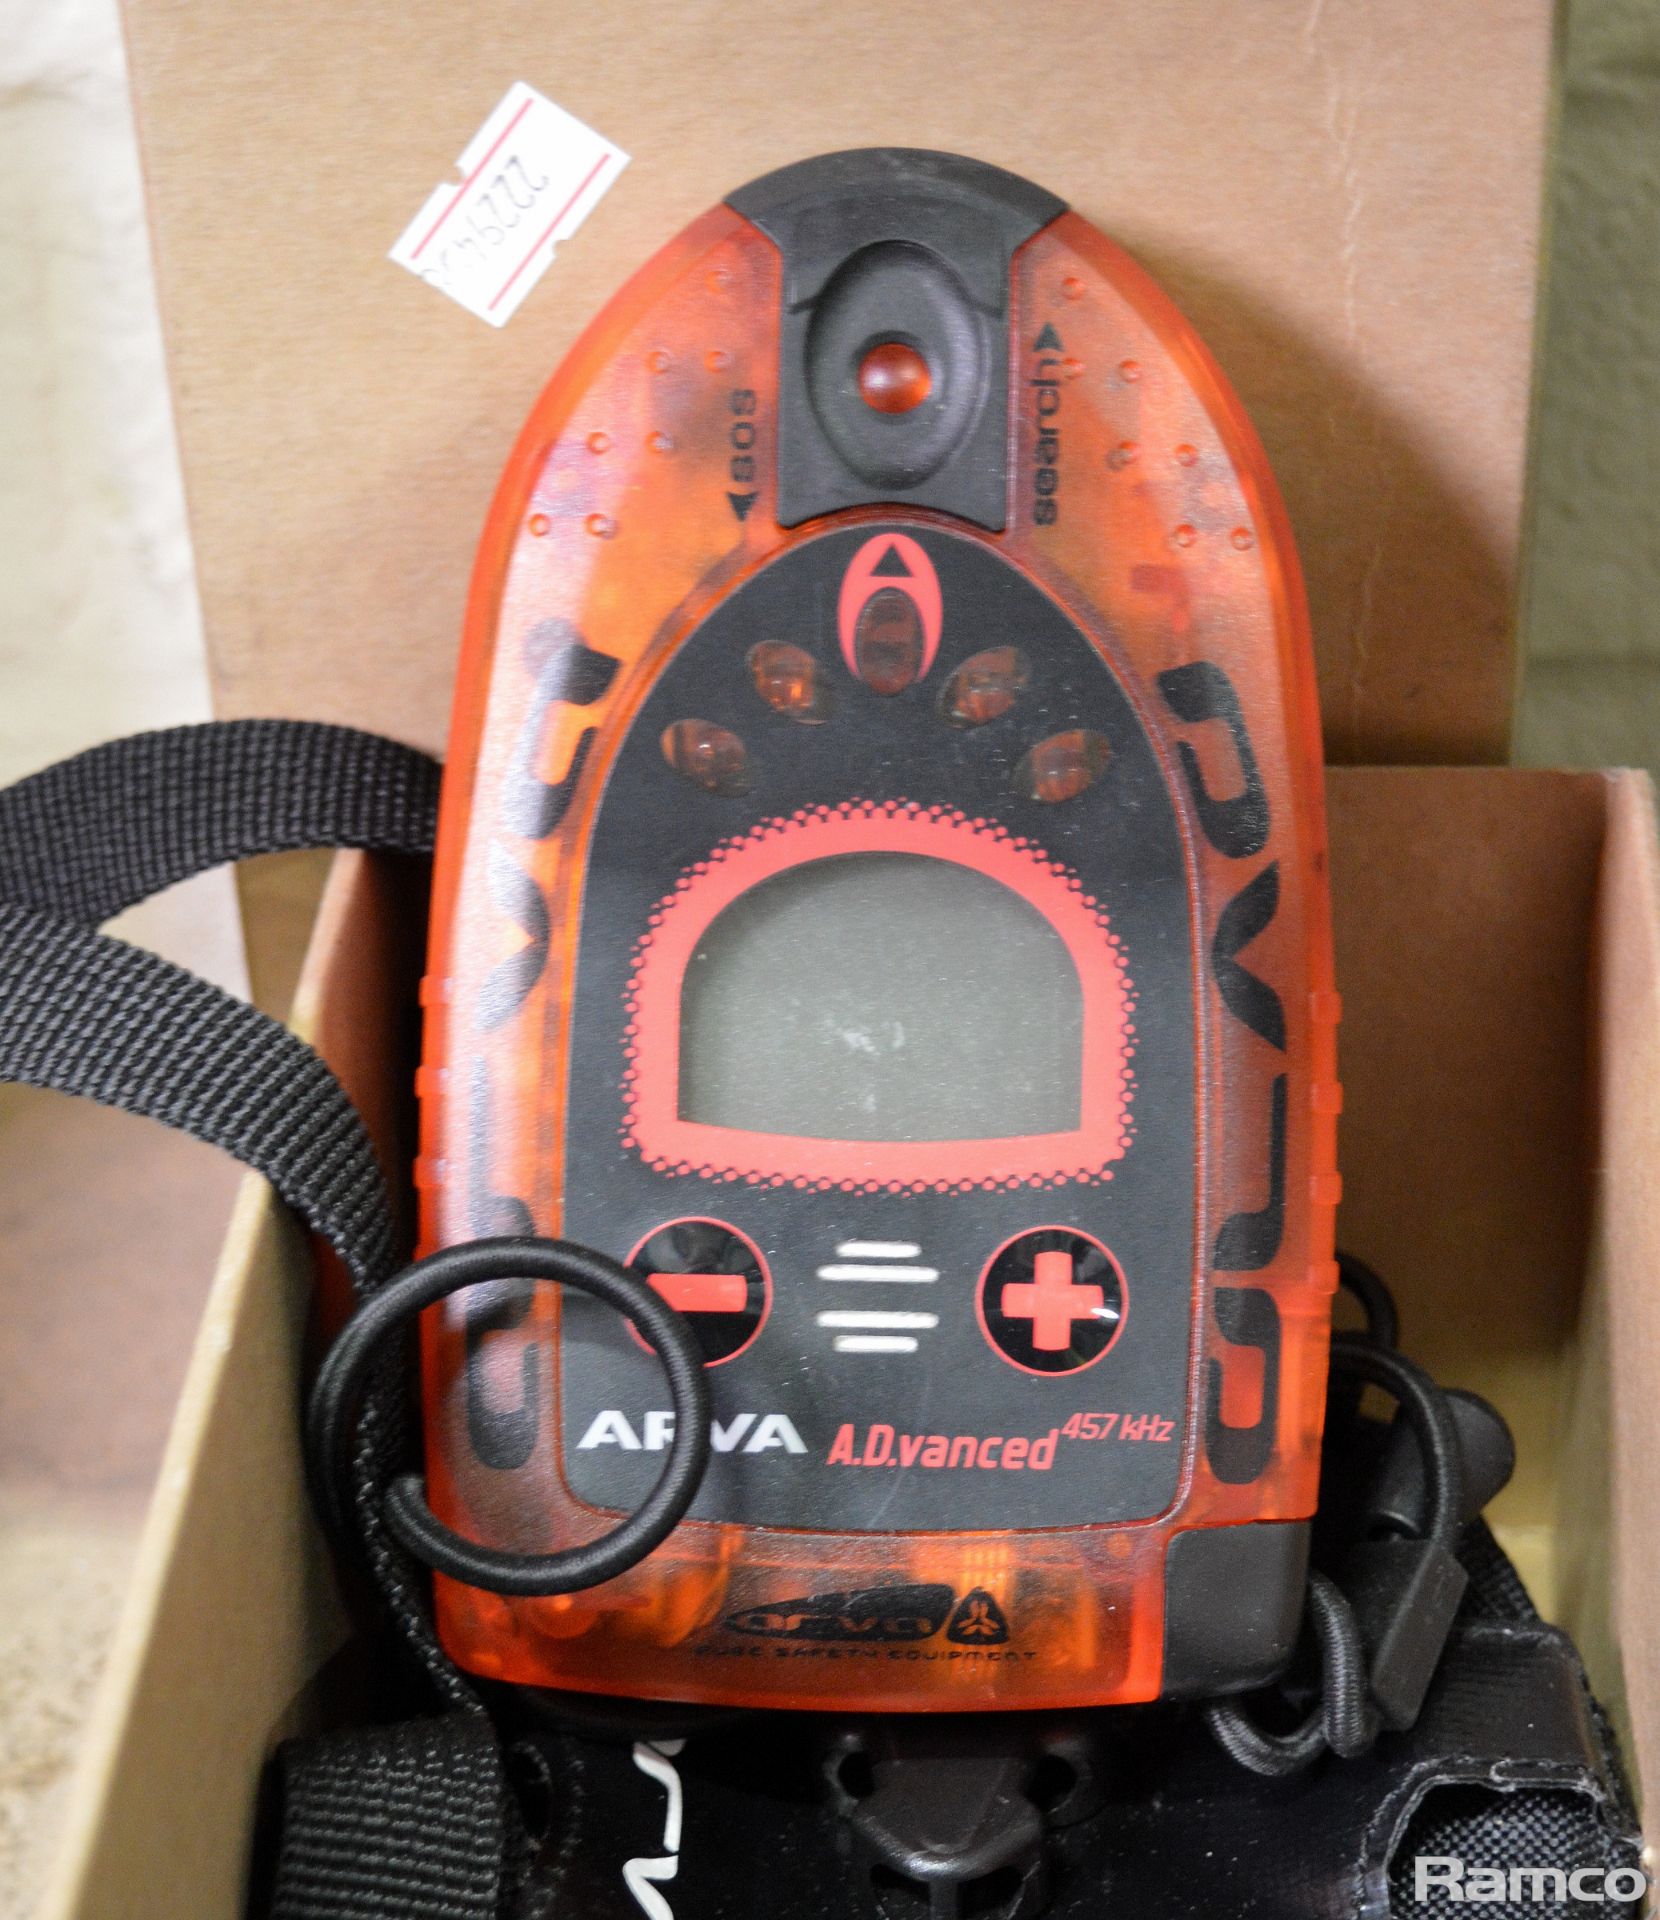 Arva A.D.vanced Avalanche Transceiver - 457kHz - Image 2 of 2